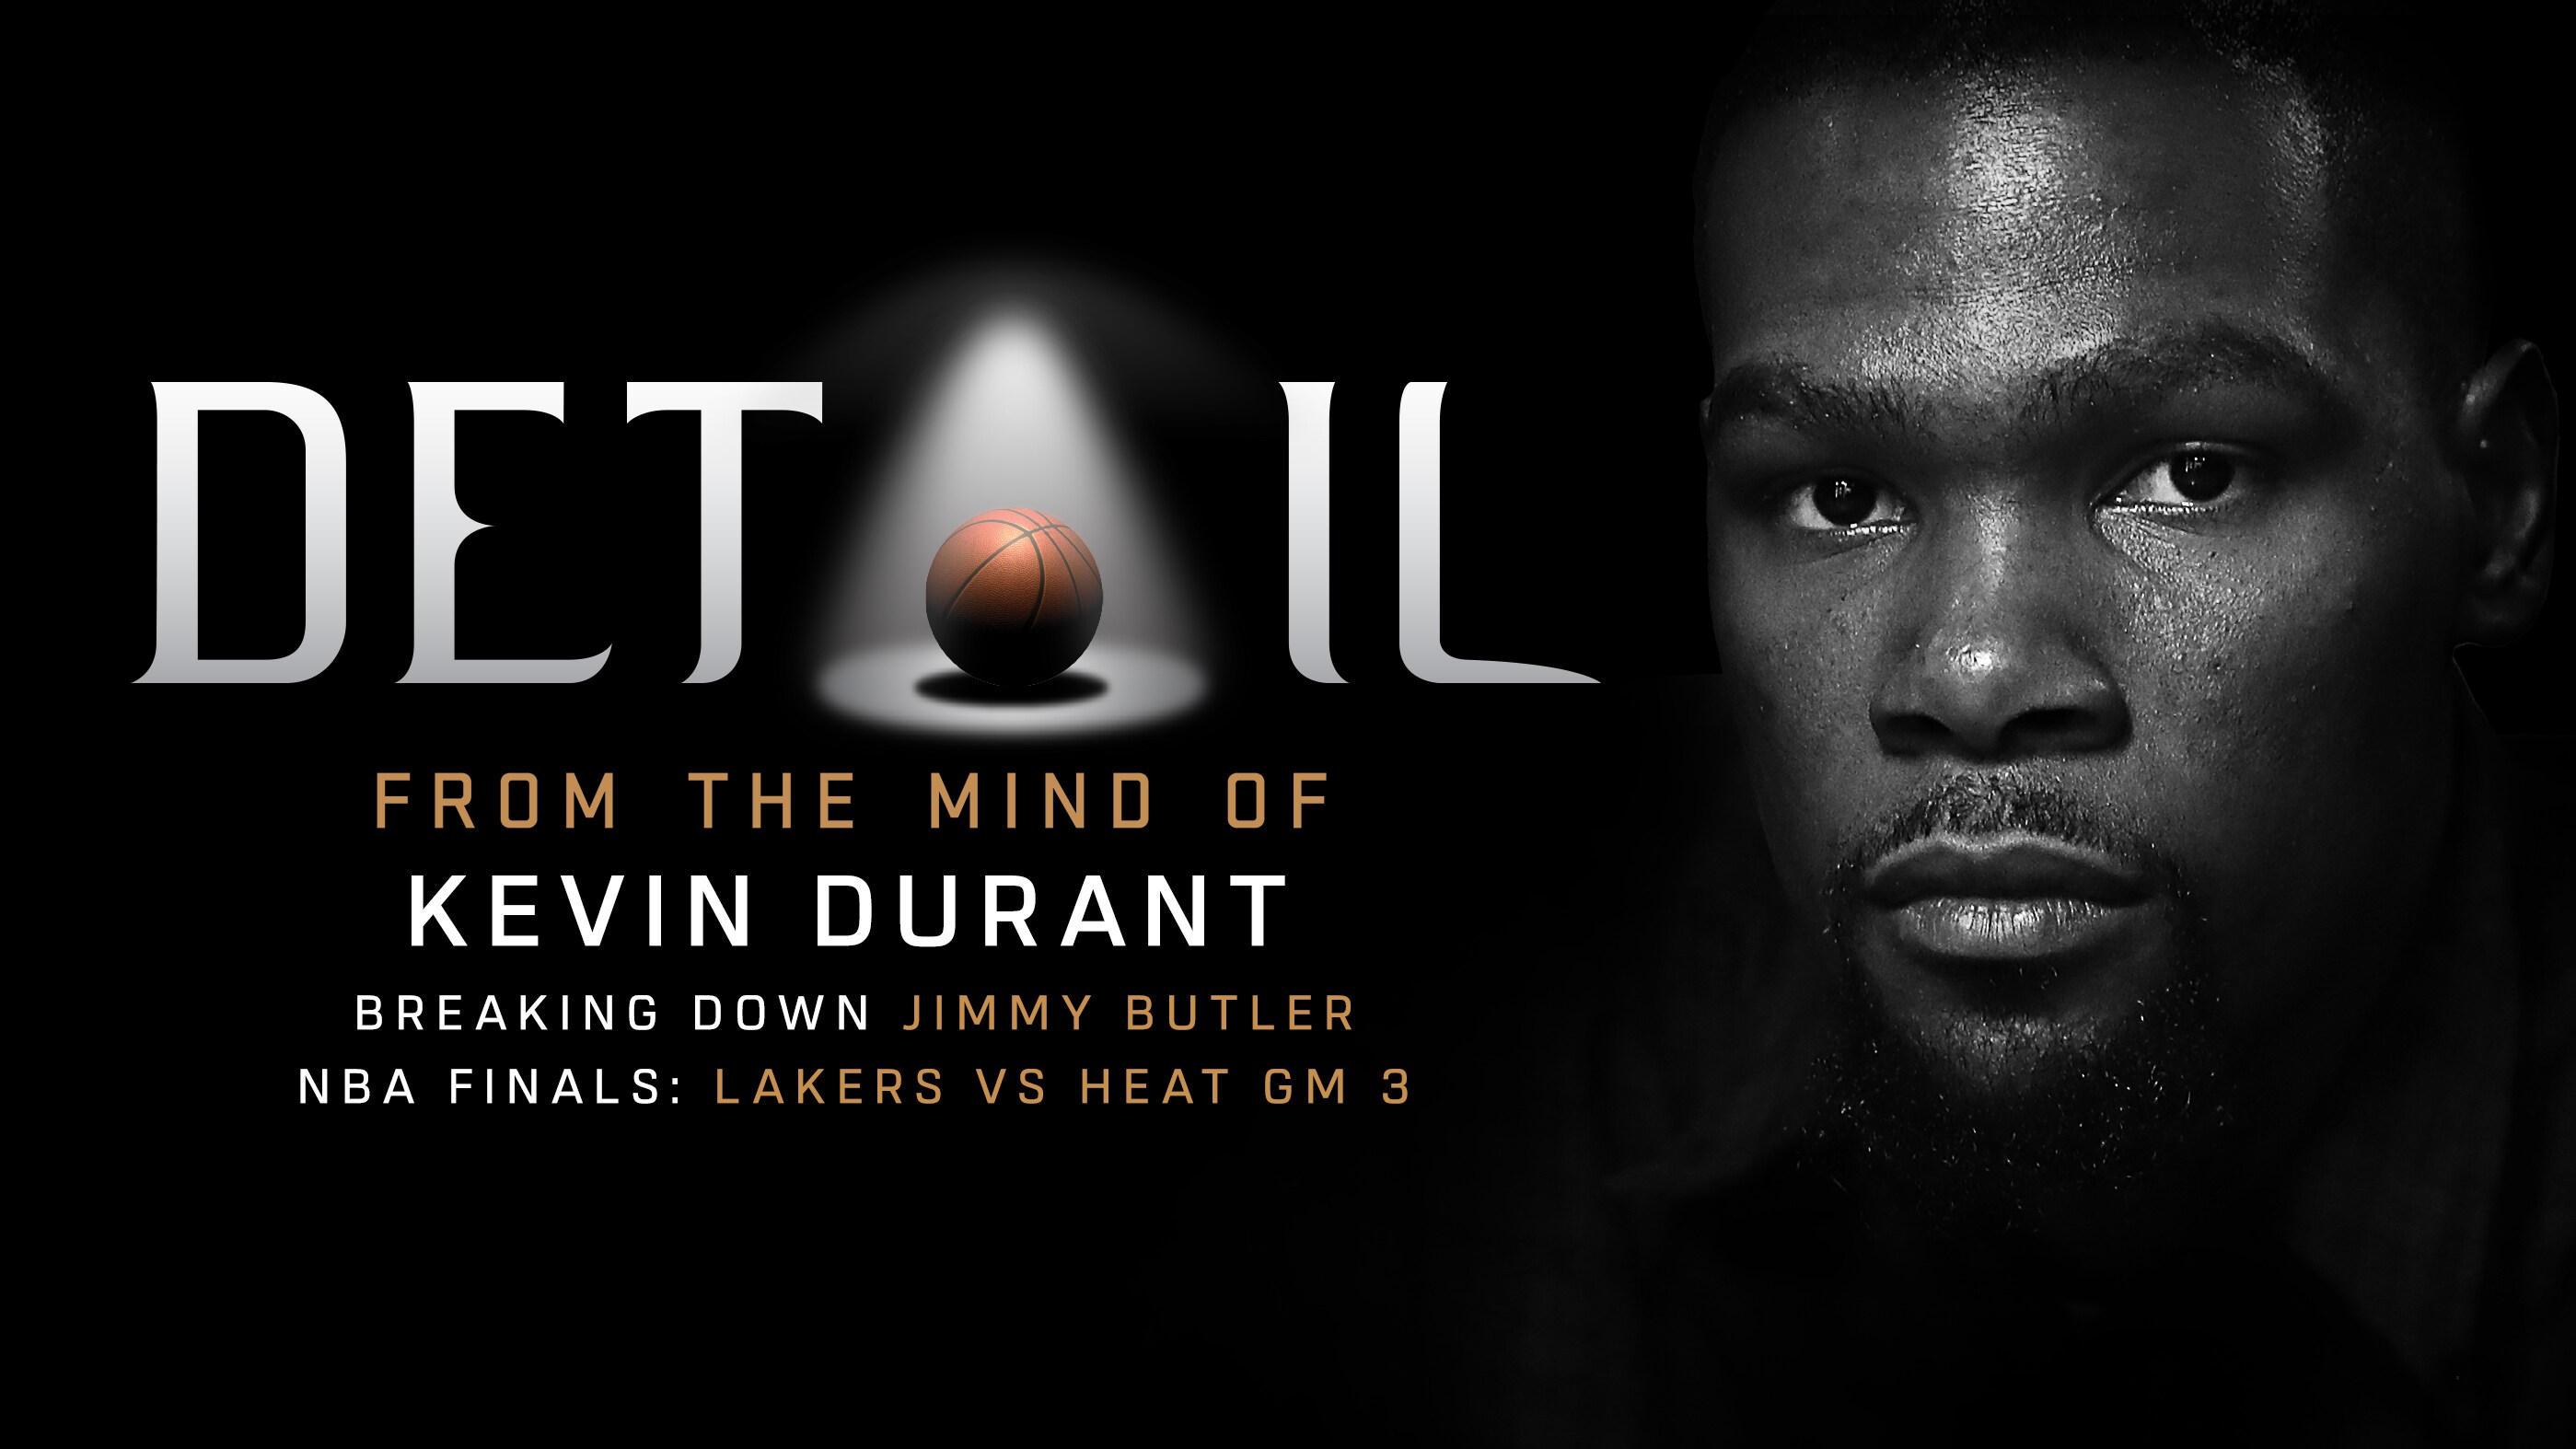 NBA Superstar Kevin Durant Joins Detail Exclusively on ESPN+